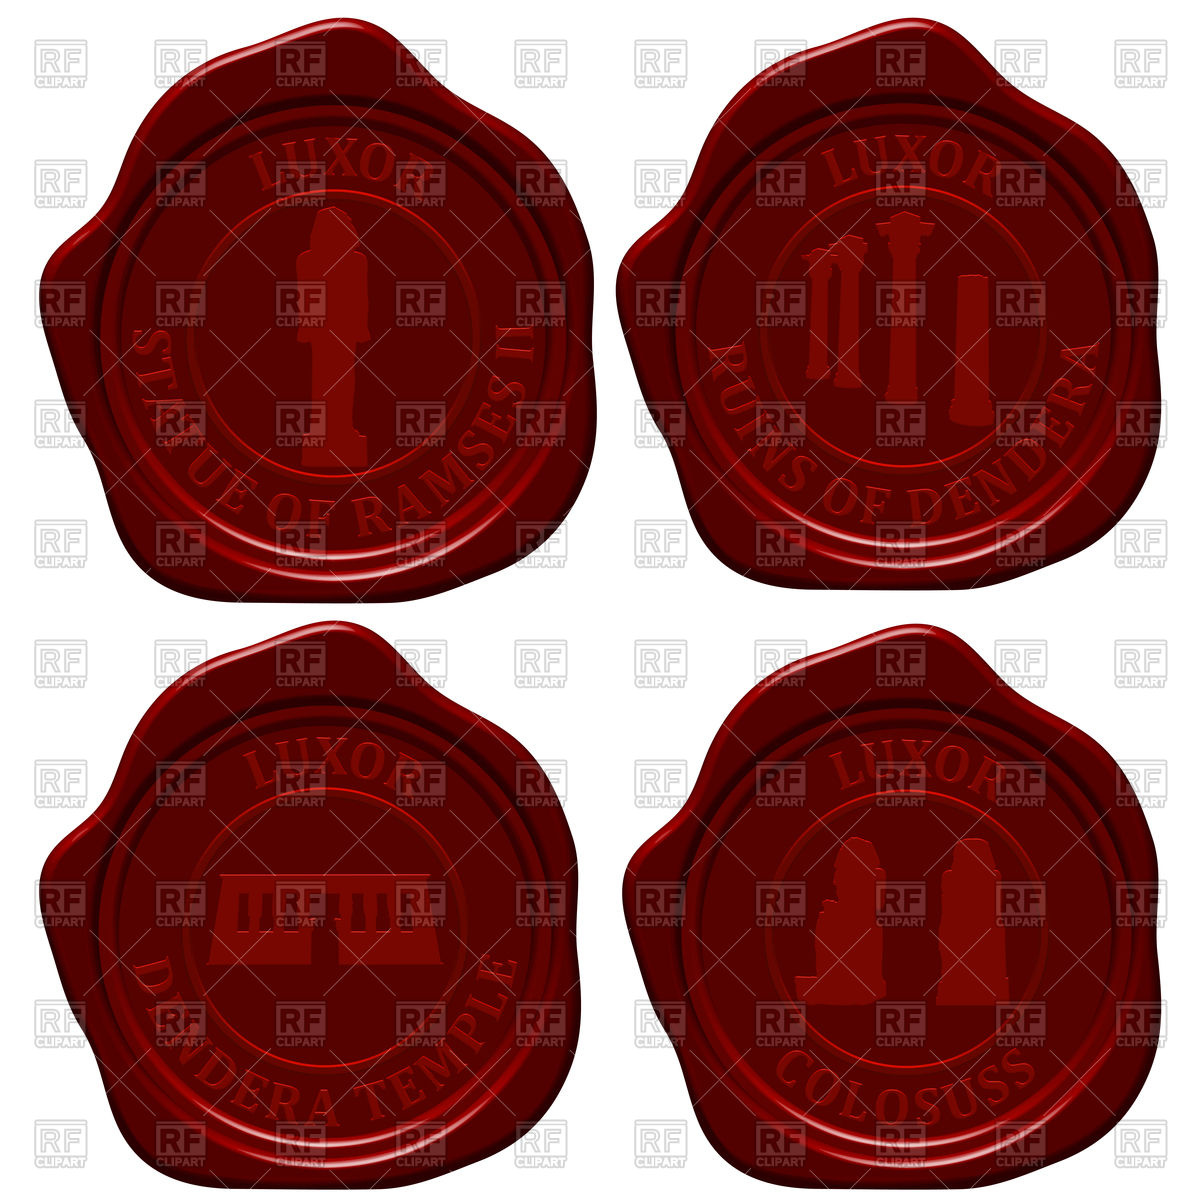 Red wax seal isolated on white background. Wax seal logo. Stamp